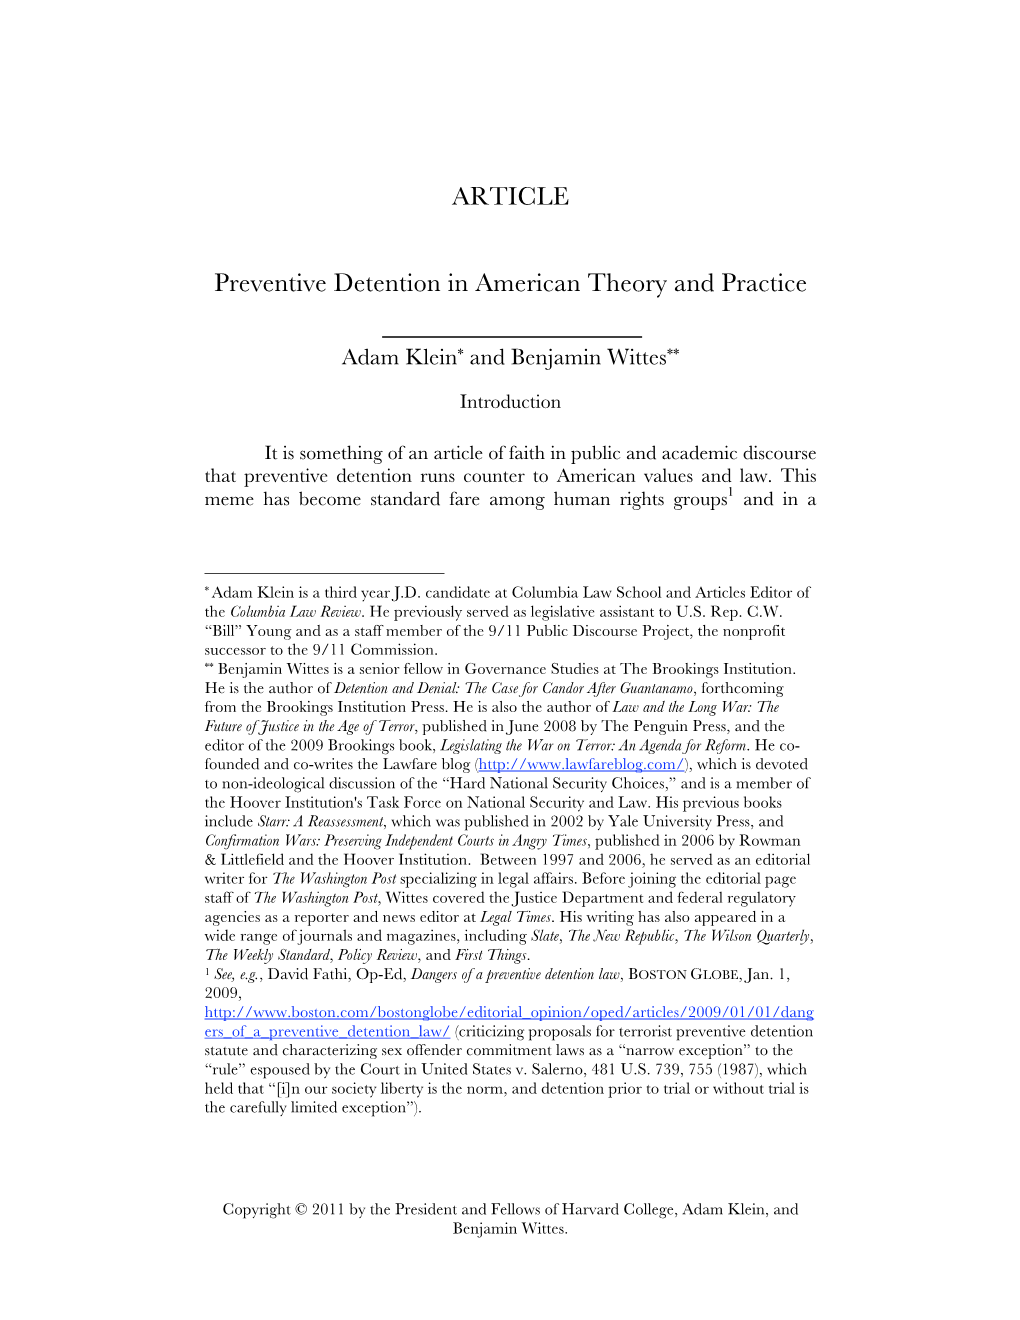 ARTICLE Preventive Detention in American Theory and Practice